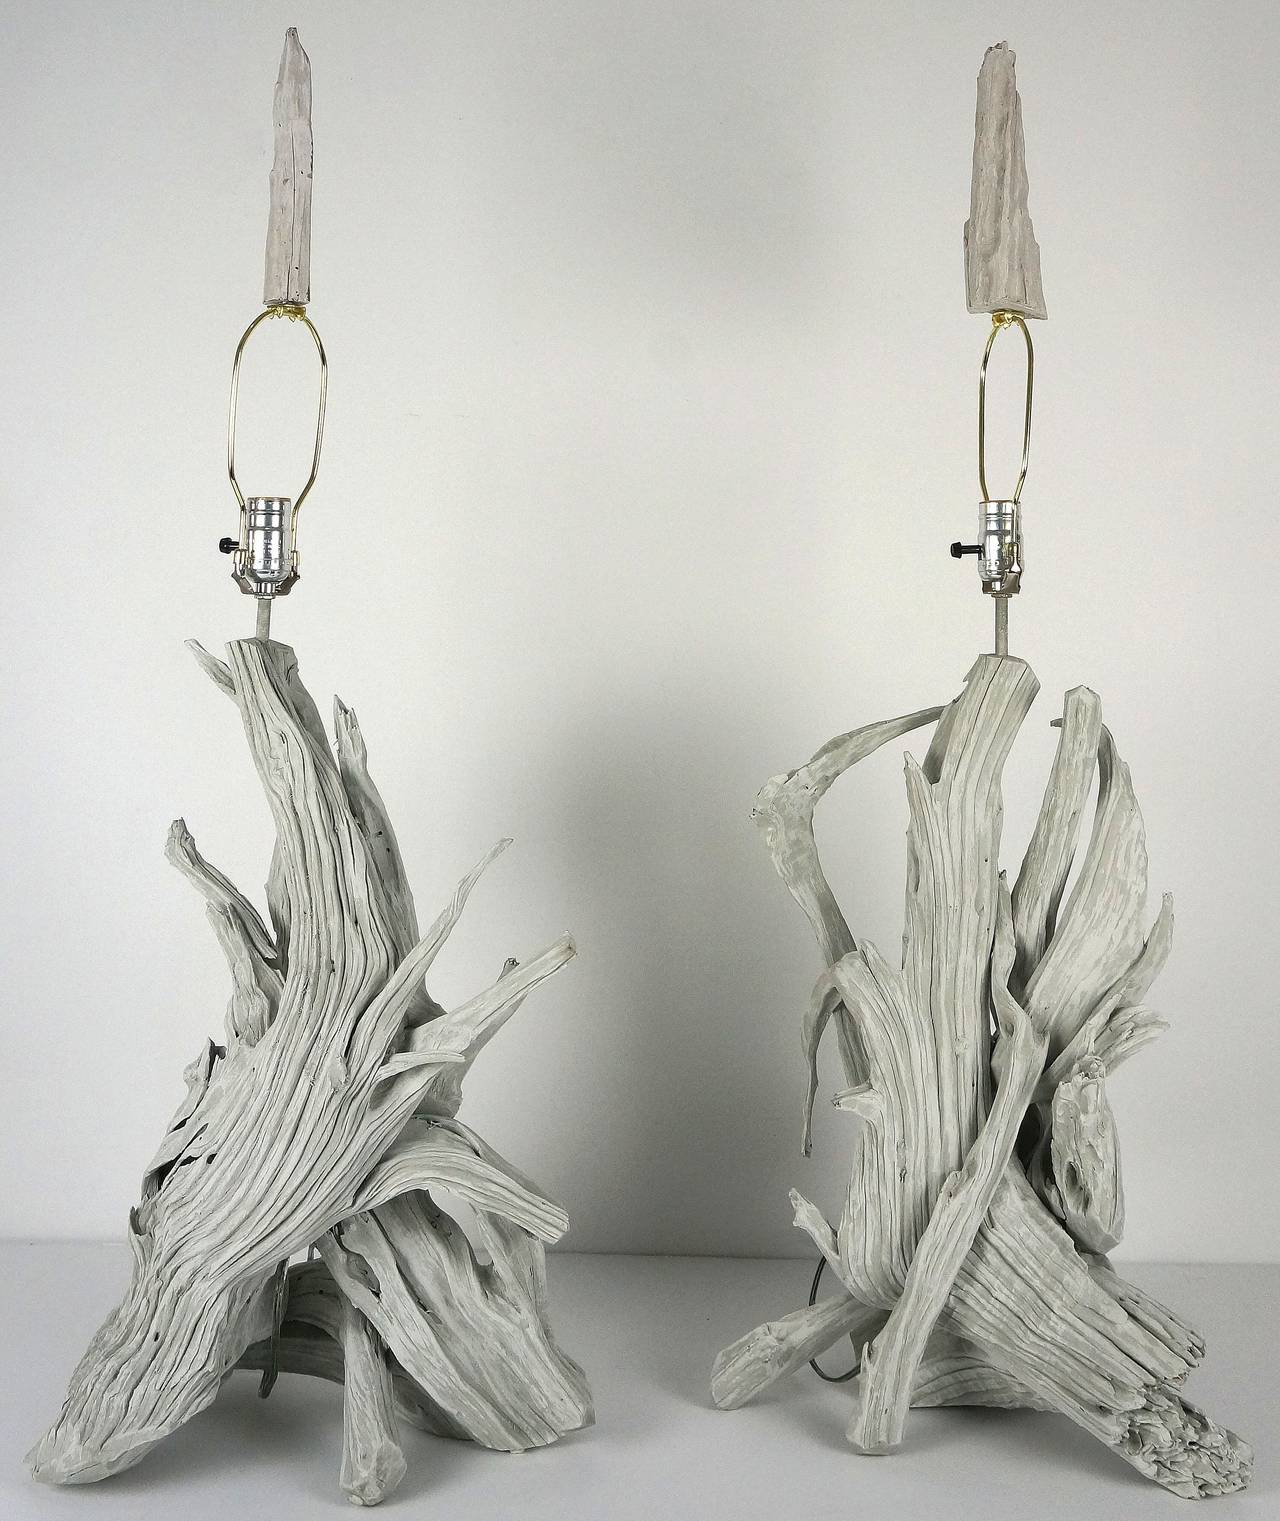 Pair of White-Washed Driftwood Table Lamps, American, 1950s-1960s 4